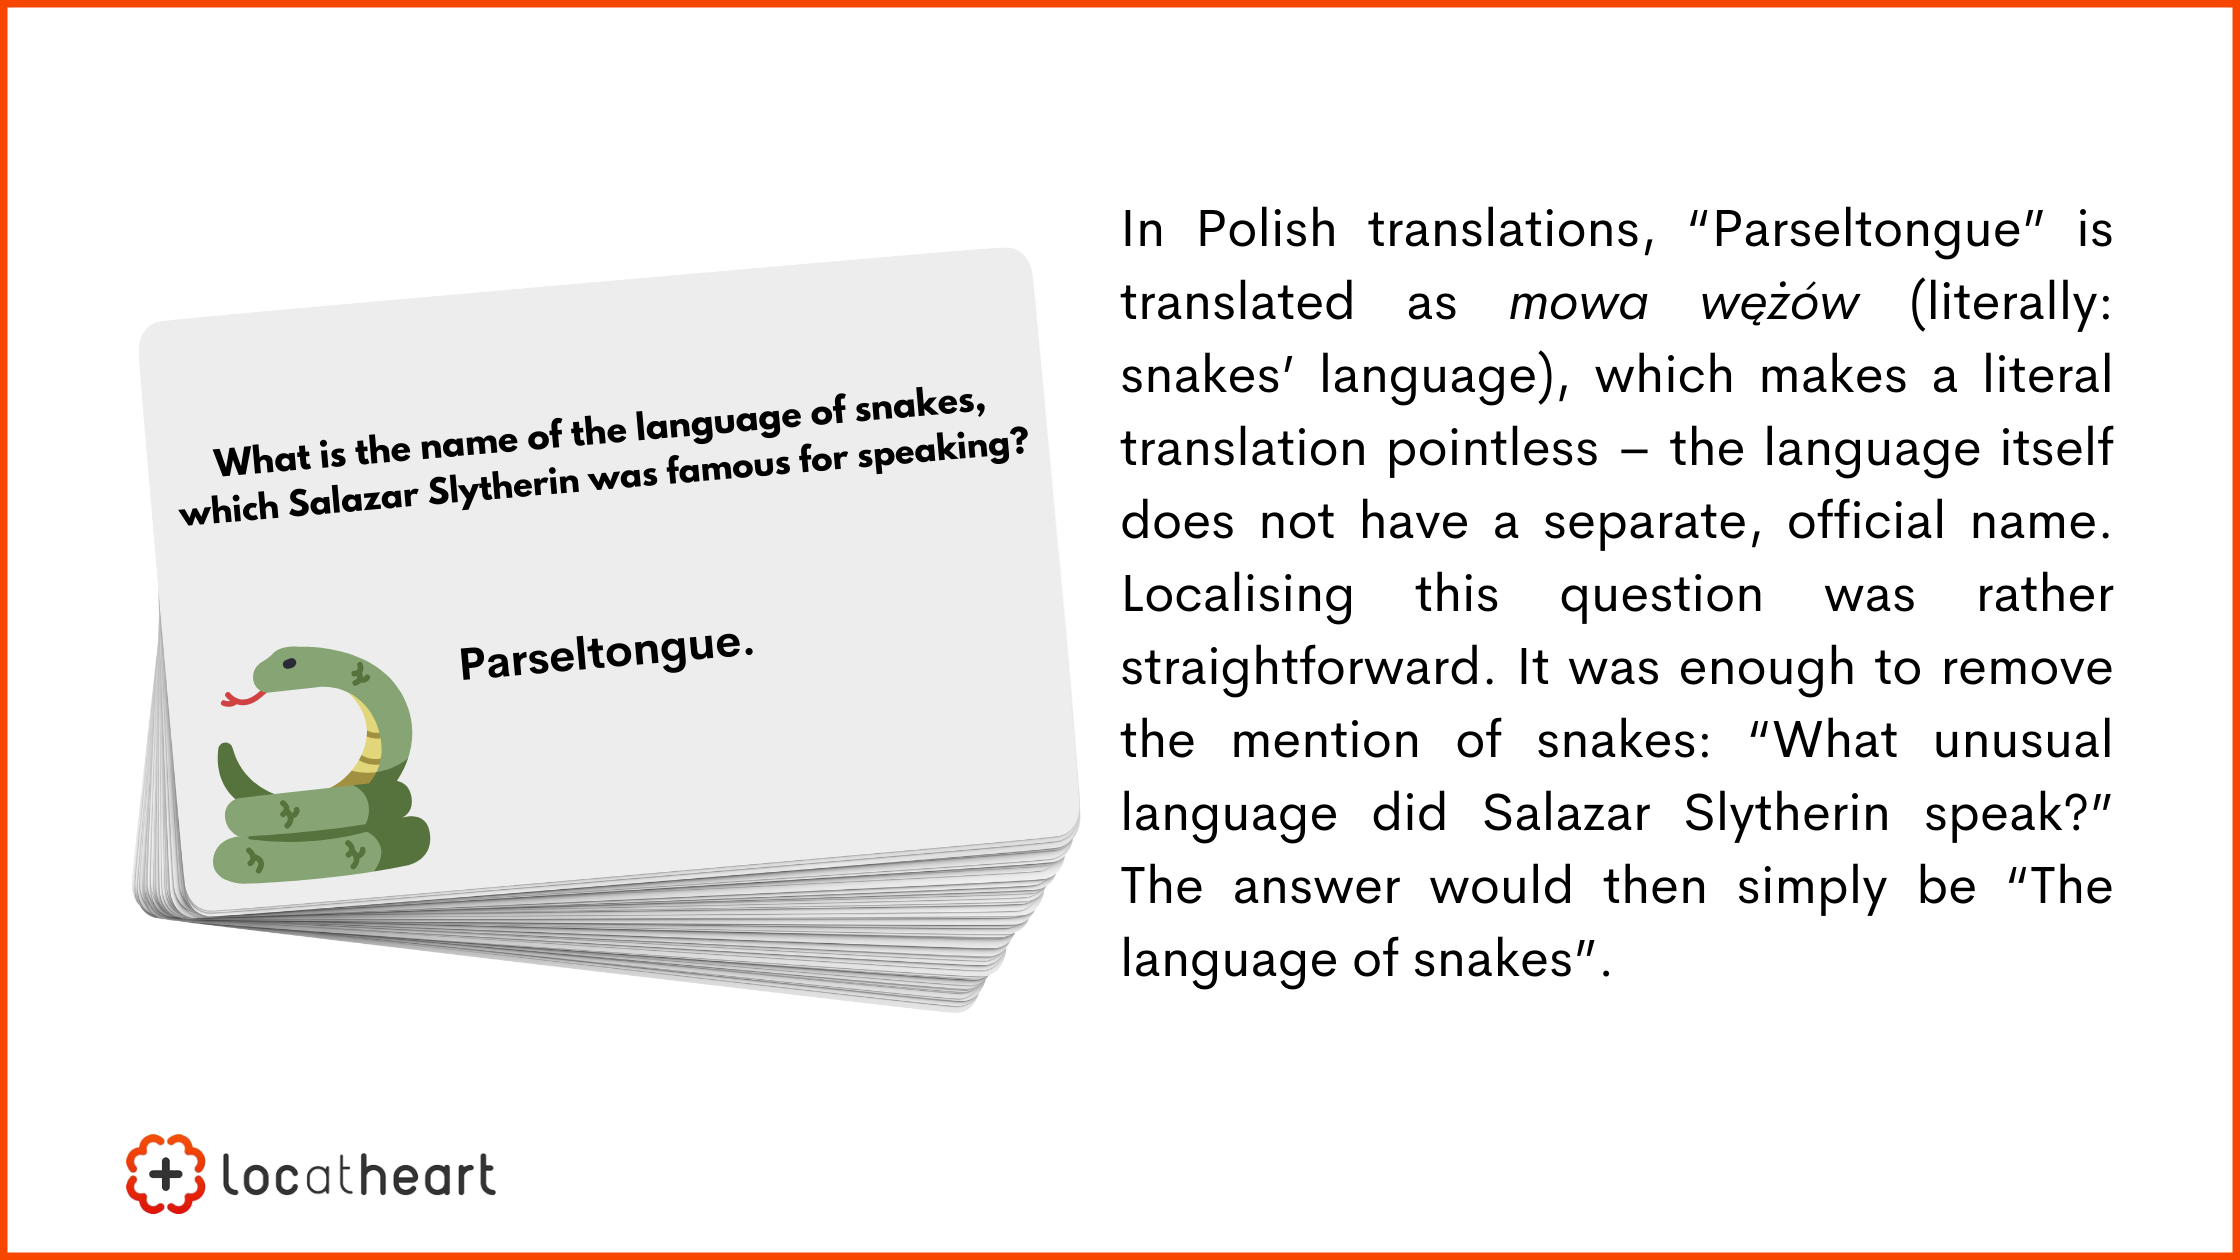 board and card games translation: In Polish translations, “Parseltongue” is translated as mowa wężów (literally: snakes’ language), which makes a literal translation pointless – the language itself does not have a separate, official name. Localising this question was rather straightforward. It was enough to remove the mention of snakes: “What unusual language did Salazar Slytherin speak?” The answer would then simply be “The language of snakes”.